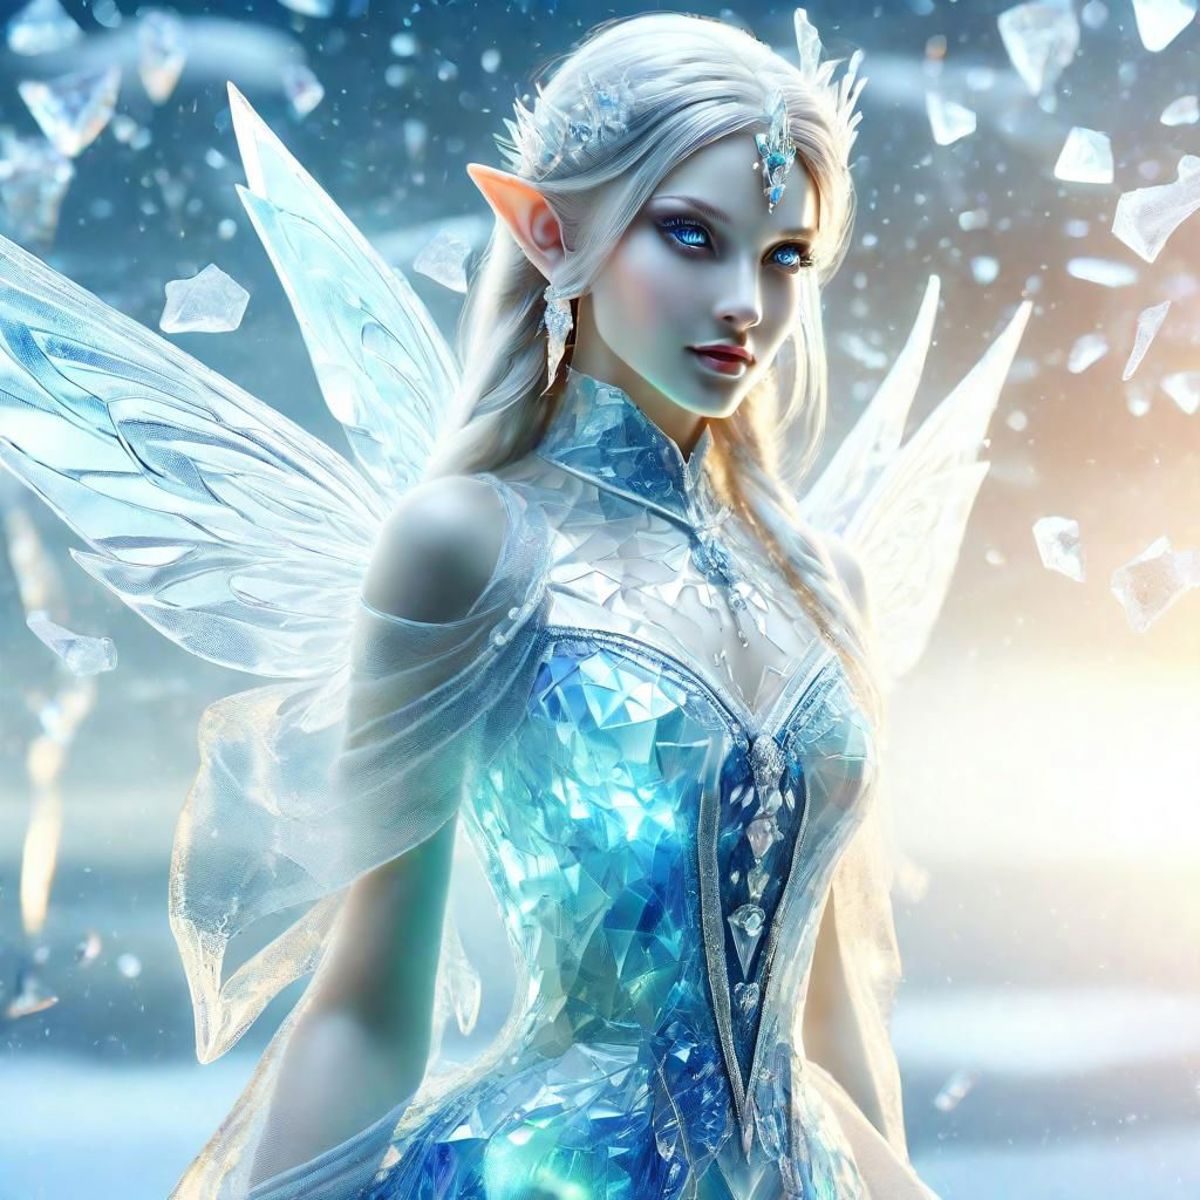 A blue fairy with white wings and a blue dress.